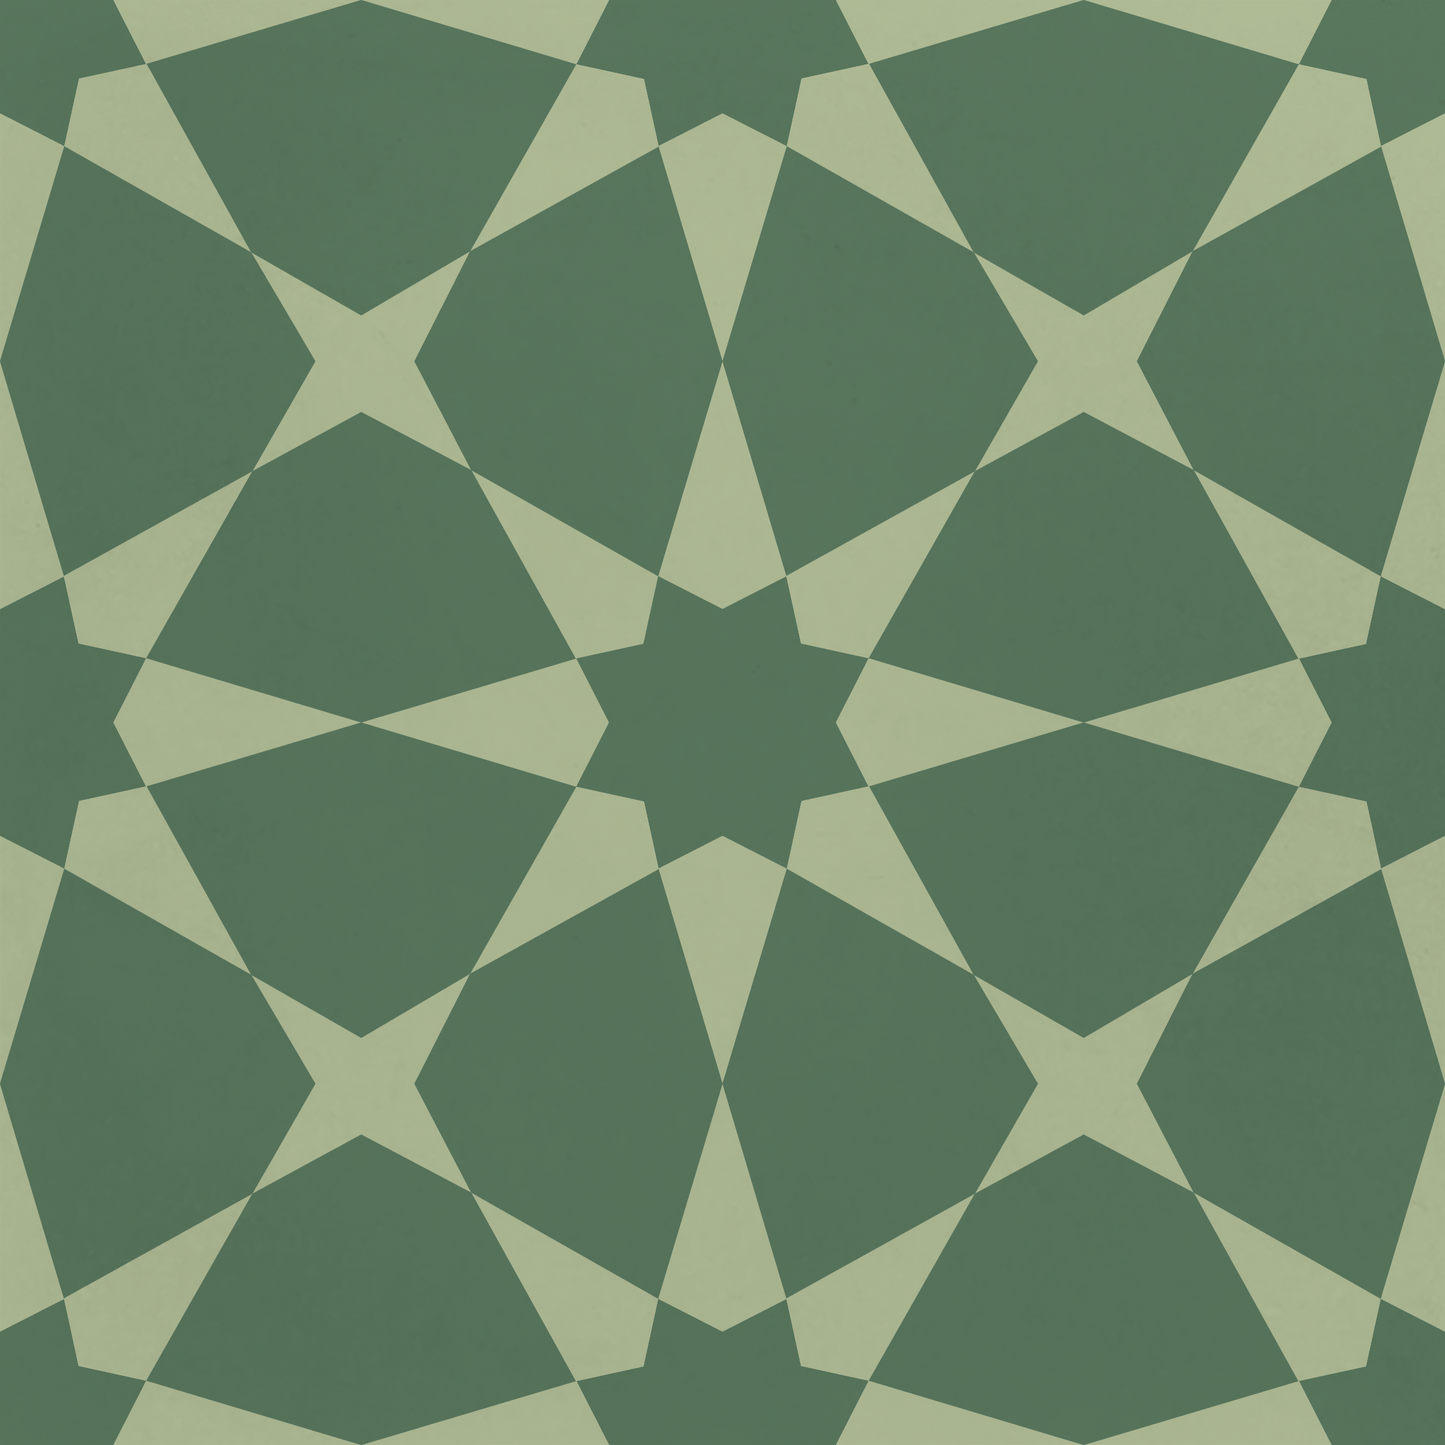 8x8 cement tile with a Moroccan star pattern in 2 shades of green